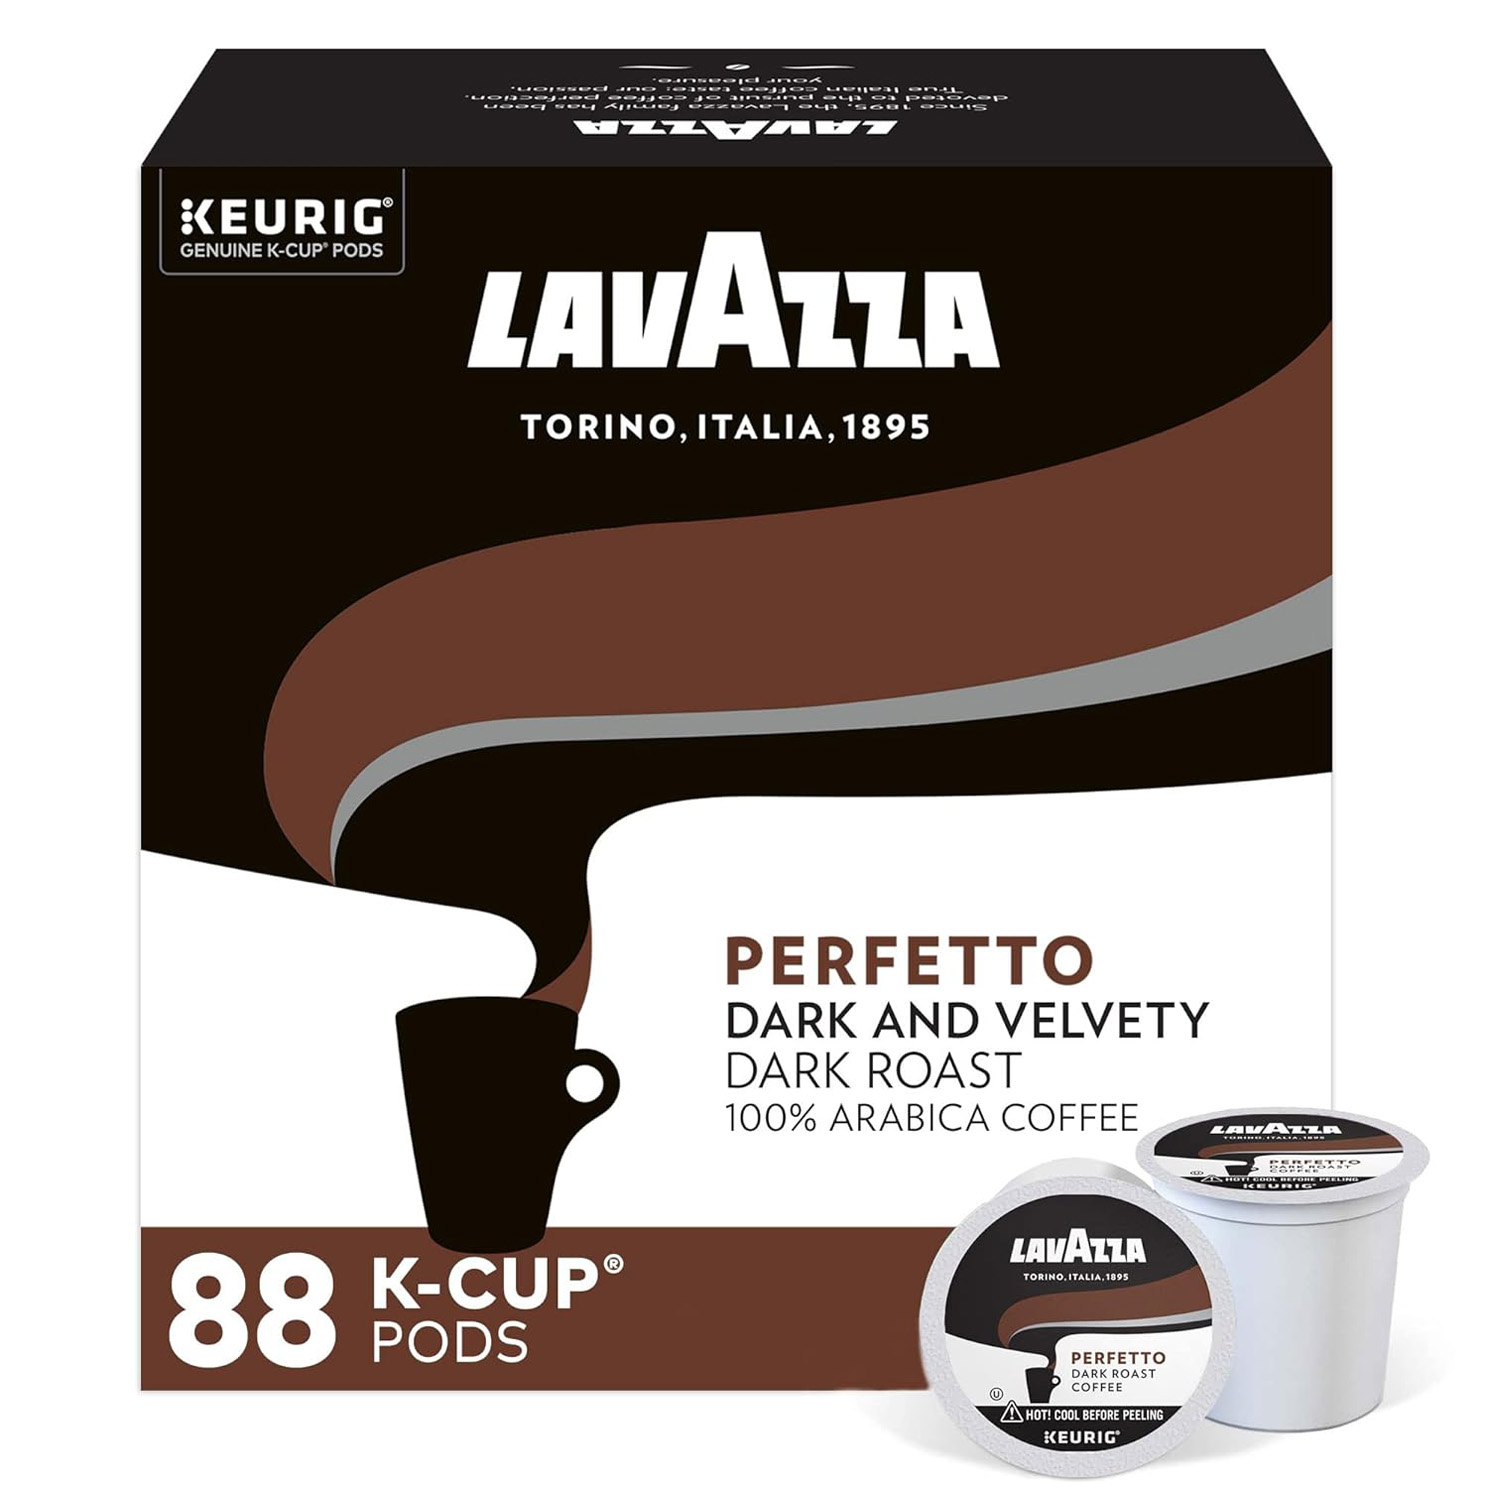 Lavazza Perfetto Single-Serve Coffee K-Cup® Pods for Keurig® Brewer